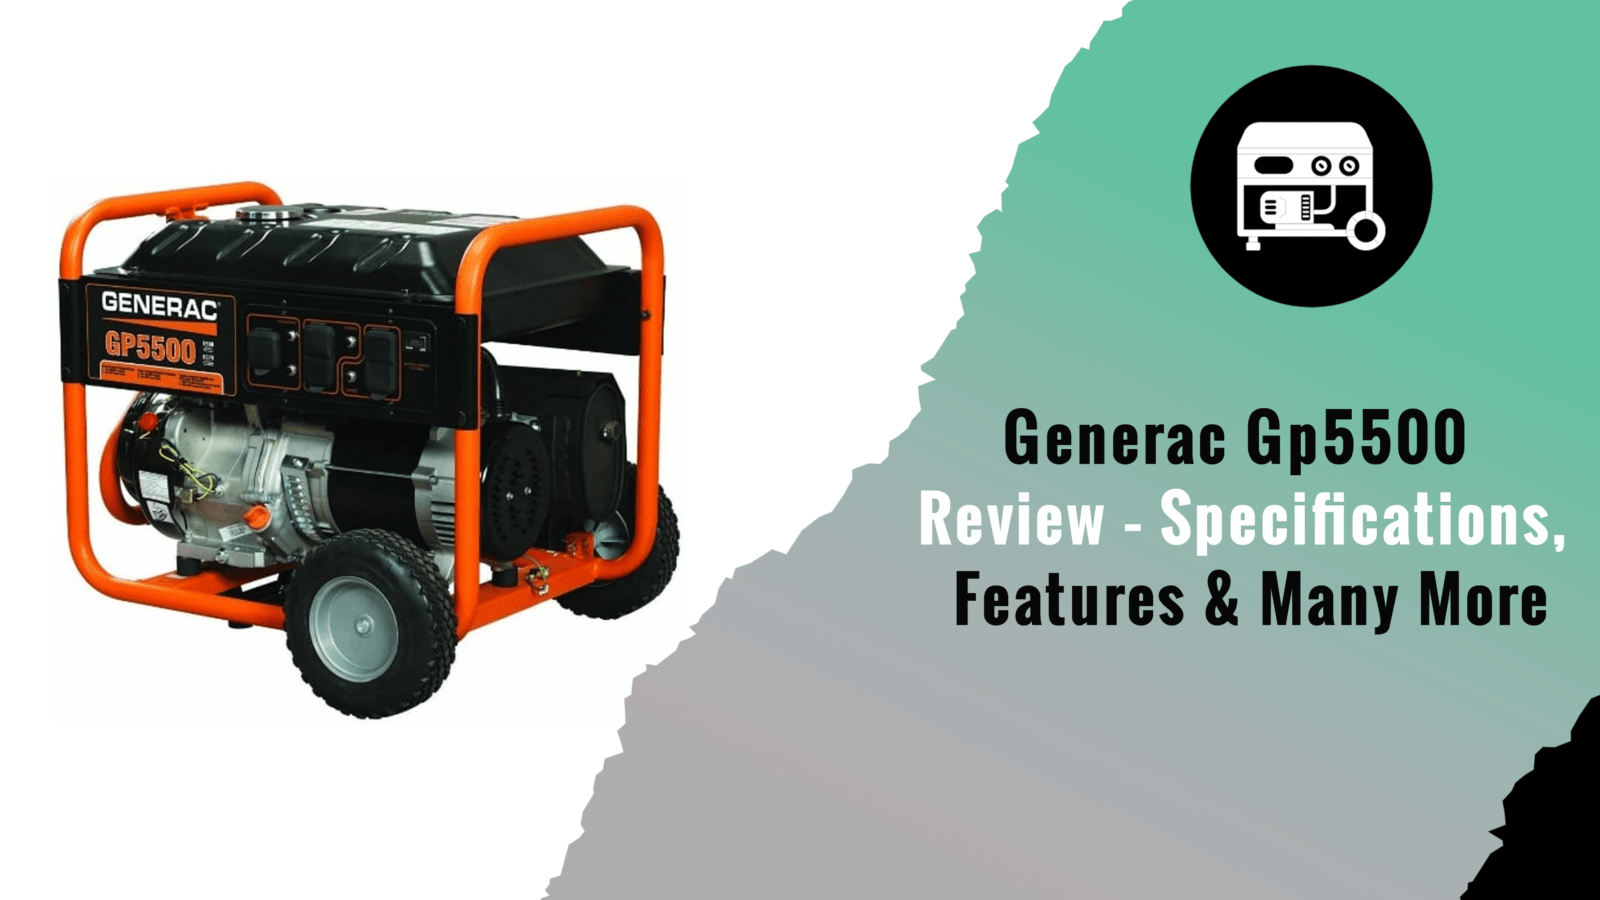 Generac Gp5500 Review – Specifications, Features & Many More